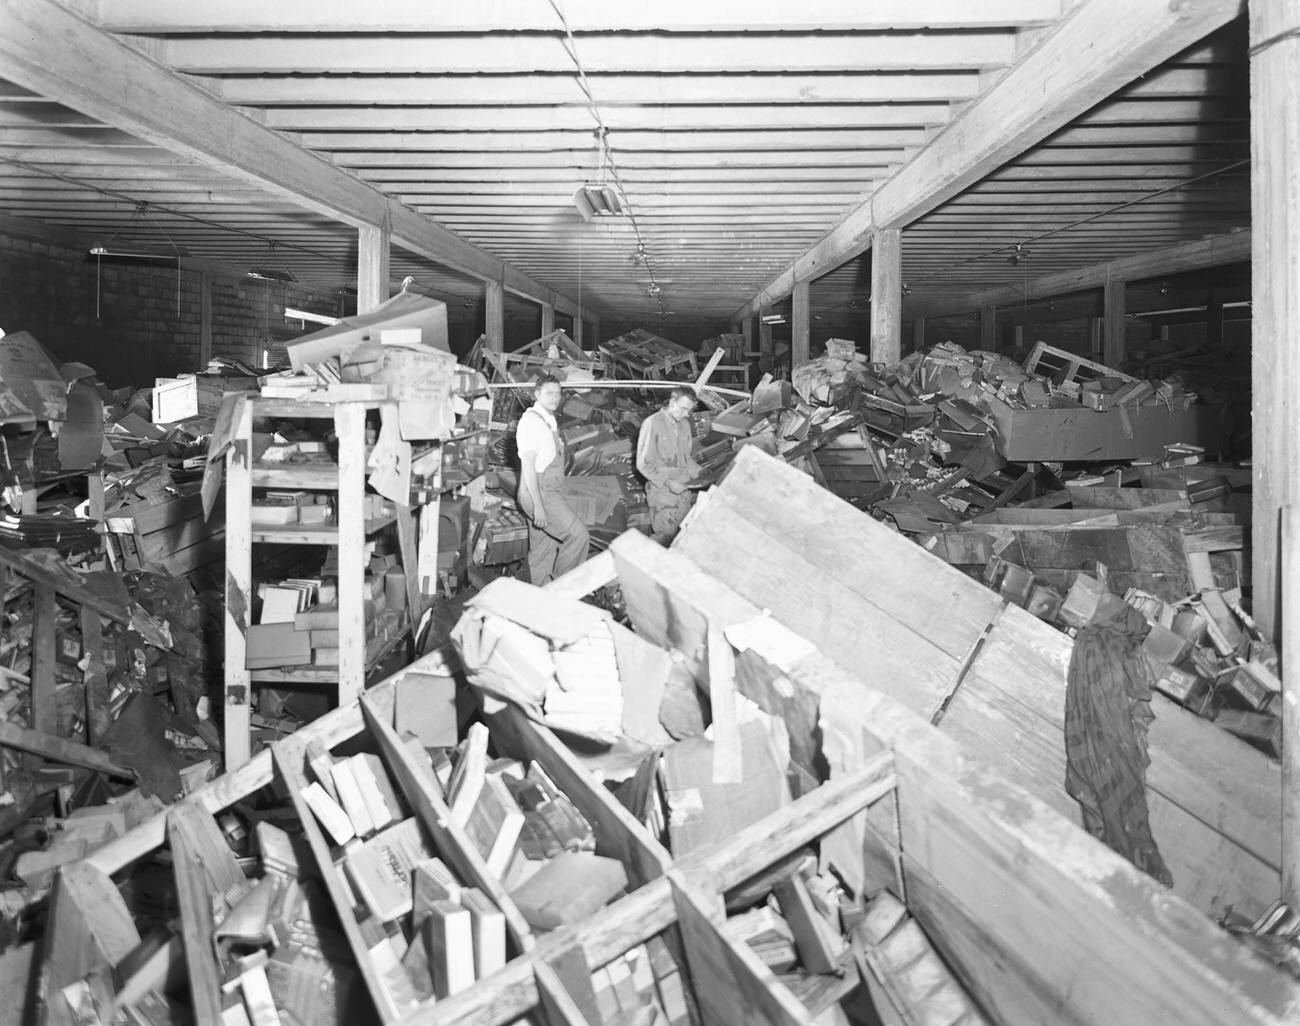 Flood damage to the interior of the Stationers Distributing Company, 1949